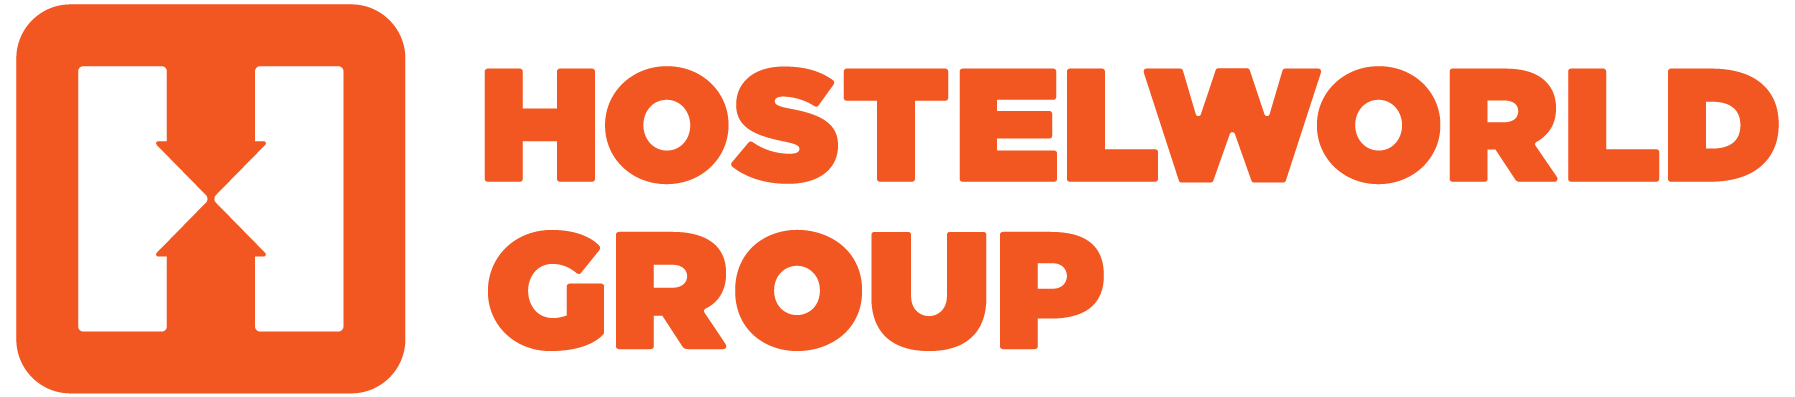 Hostelworld Group One Planet Network